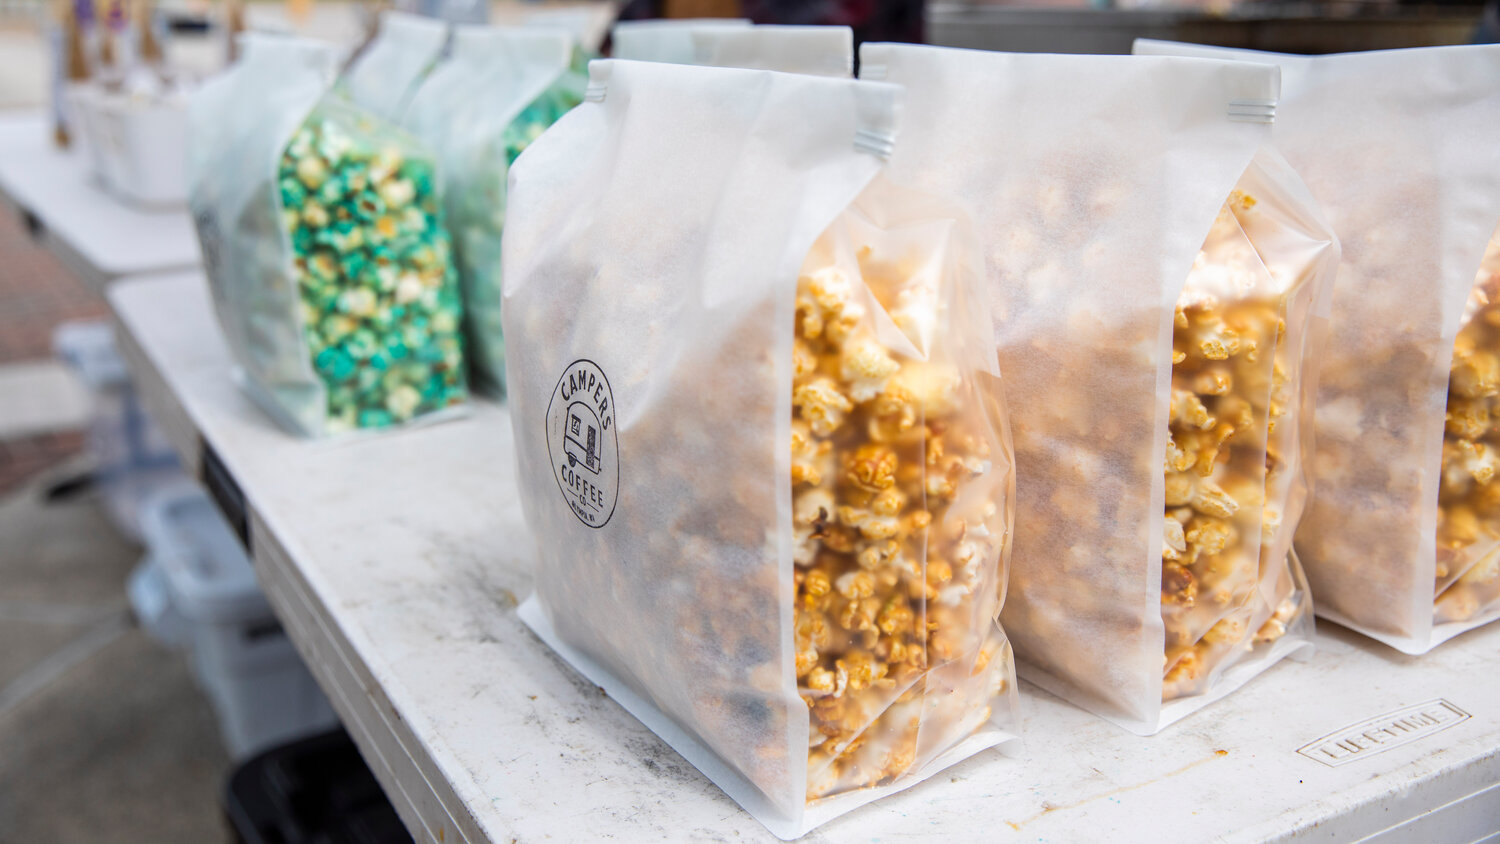 Popcorn from Campers Coffee Co. sits on display during Spring Fest at Centralia College on Tuesday, May 23. The annual event, which is open to Centralia College students at no cost, continues from 10 a.m. to 2 p.m. Thursday on the plaza and esplanade.